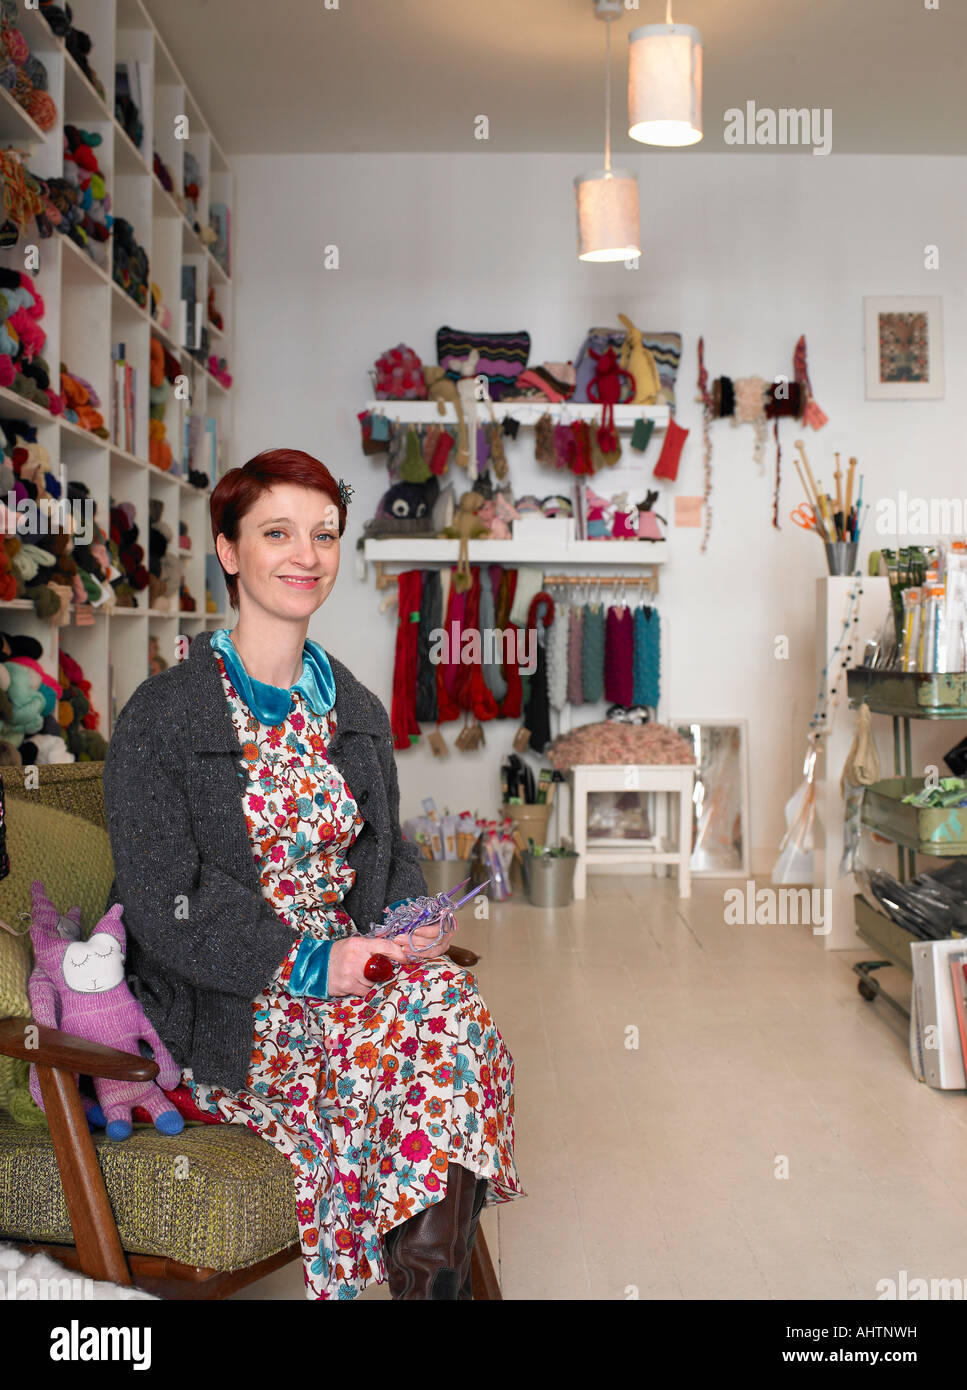 Woman sitting in craft shop, smiling, portrait Stock Photo